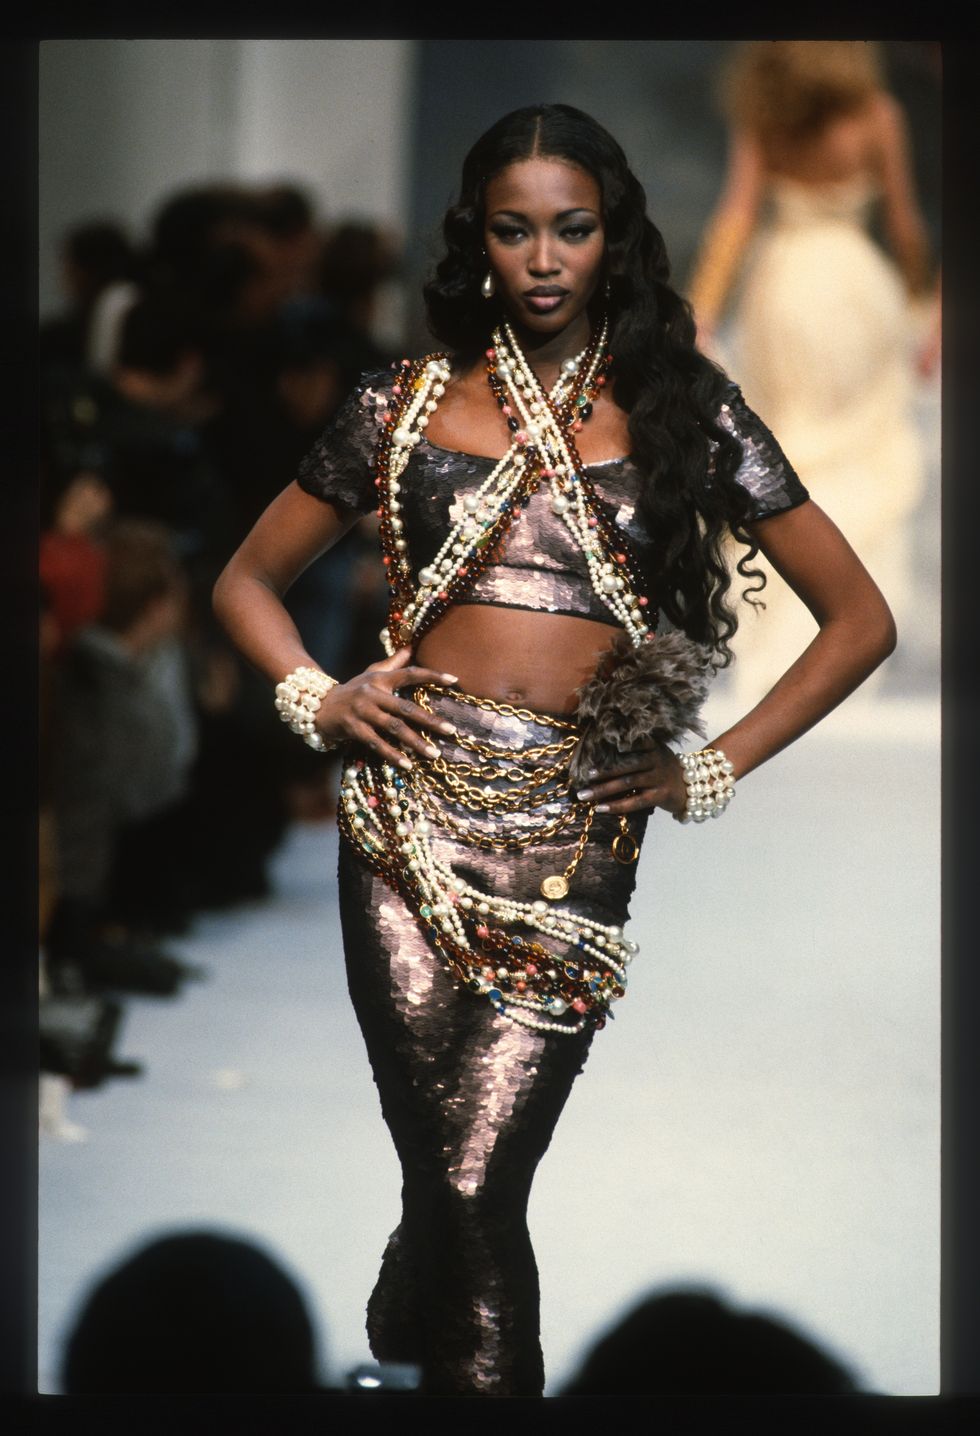 Supermodel Naomi Campbell Speaks out Against Fashion Industry Discrimination